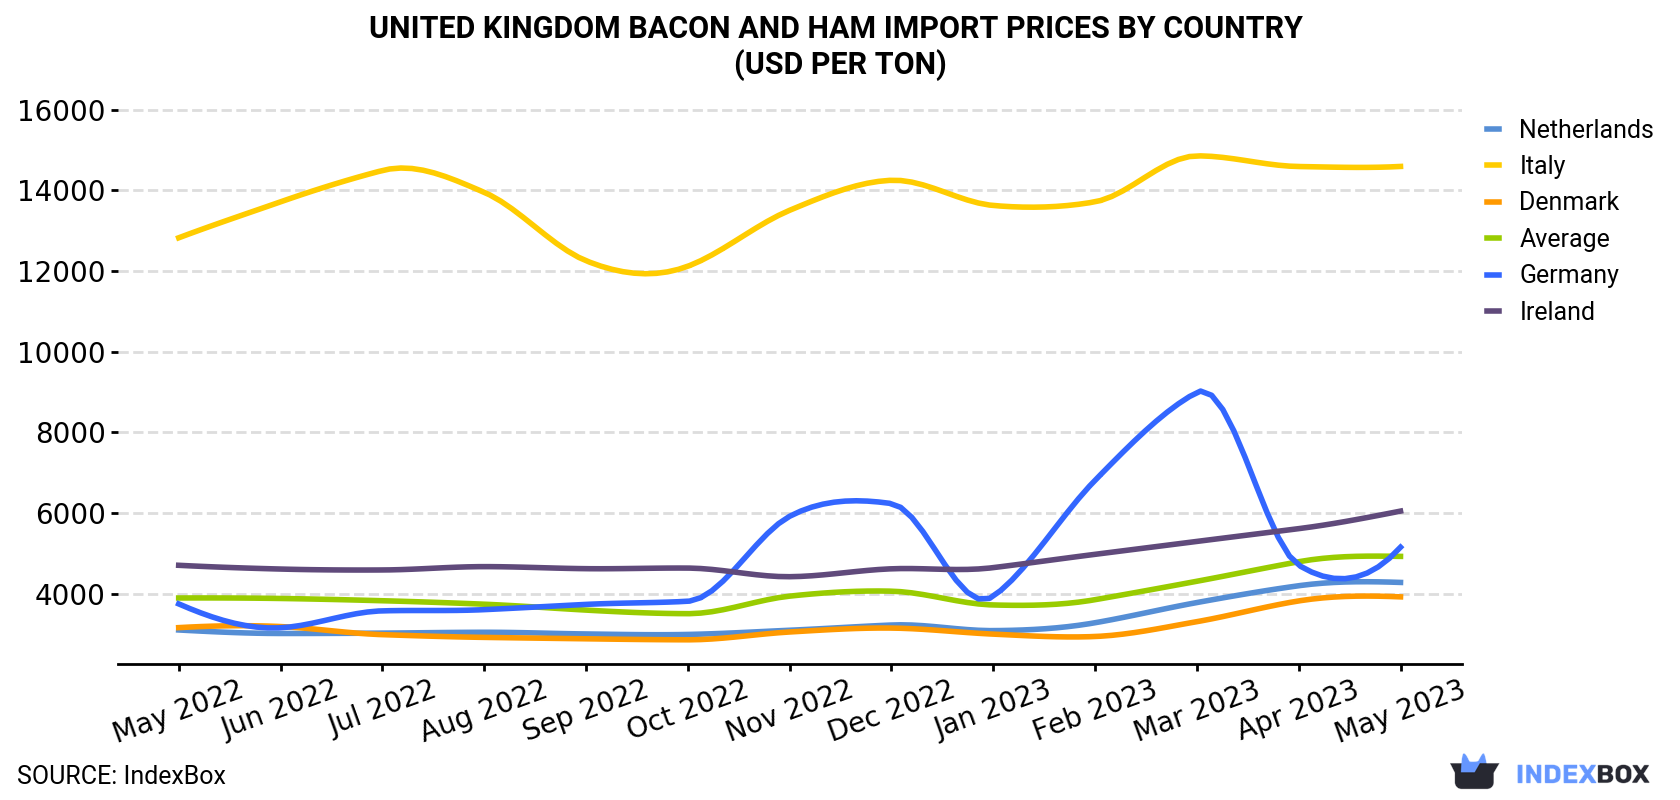 United Kingdom Bacon And Ham Import Prices By Country (USD Per Ton)